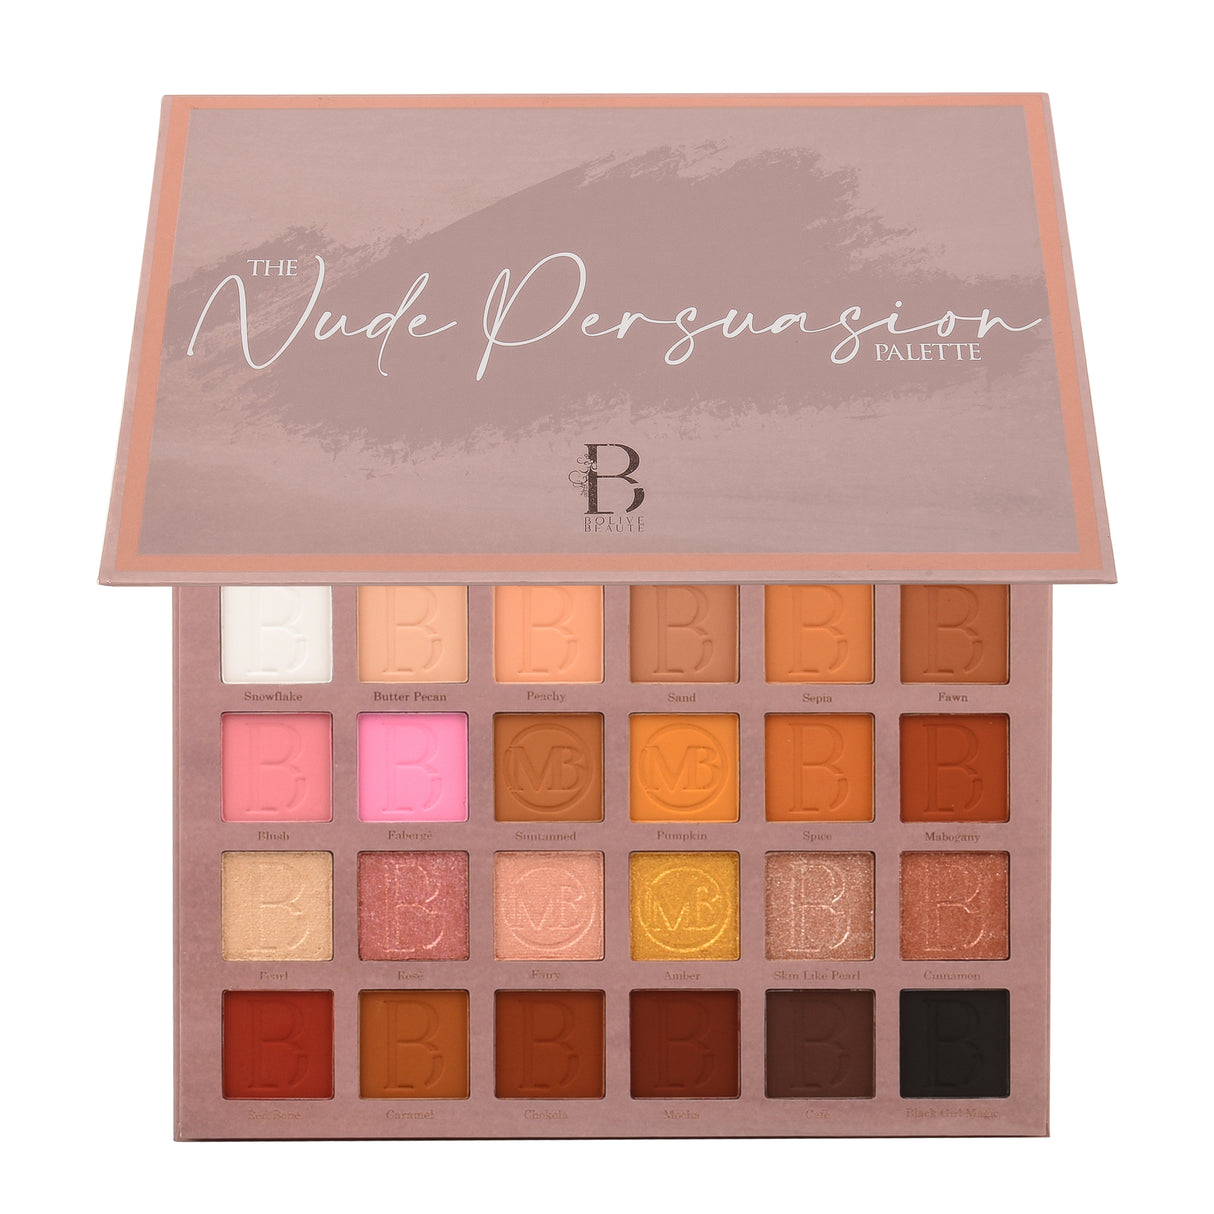 The Nude Persuasion Palette